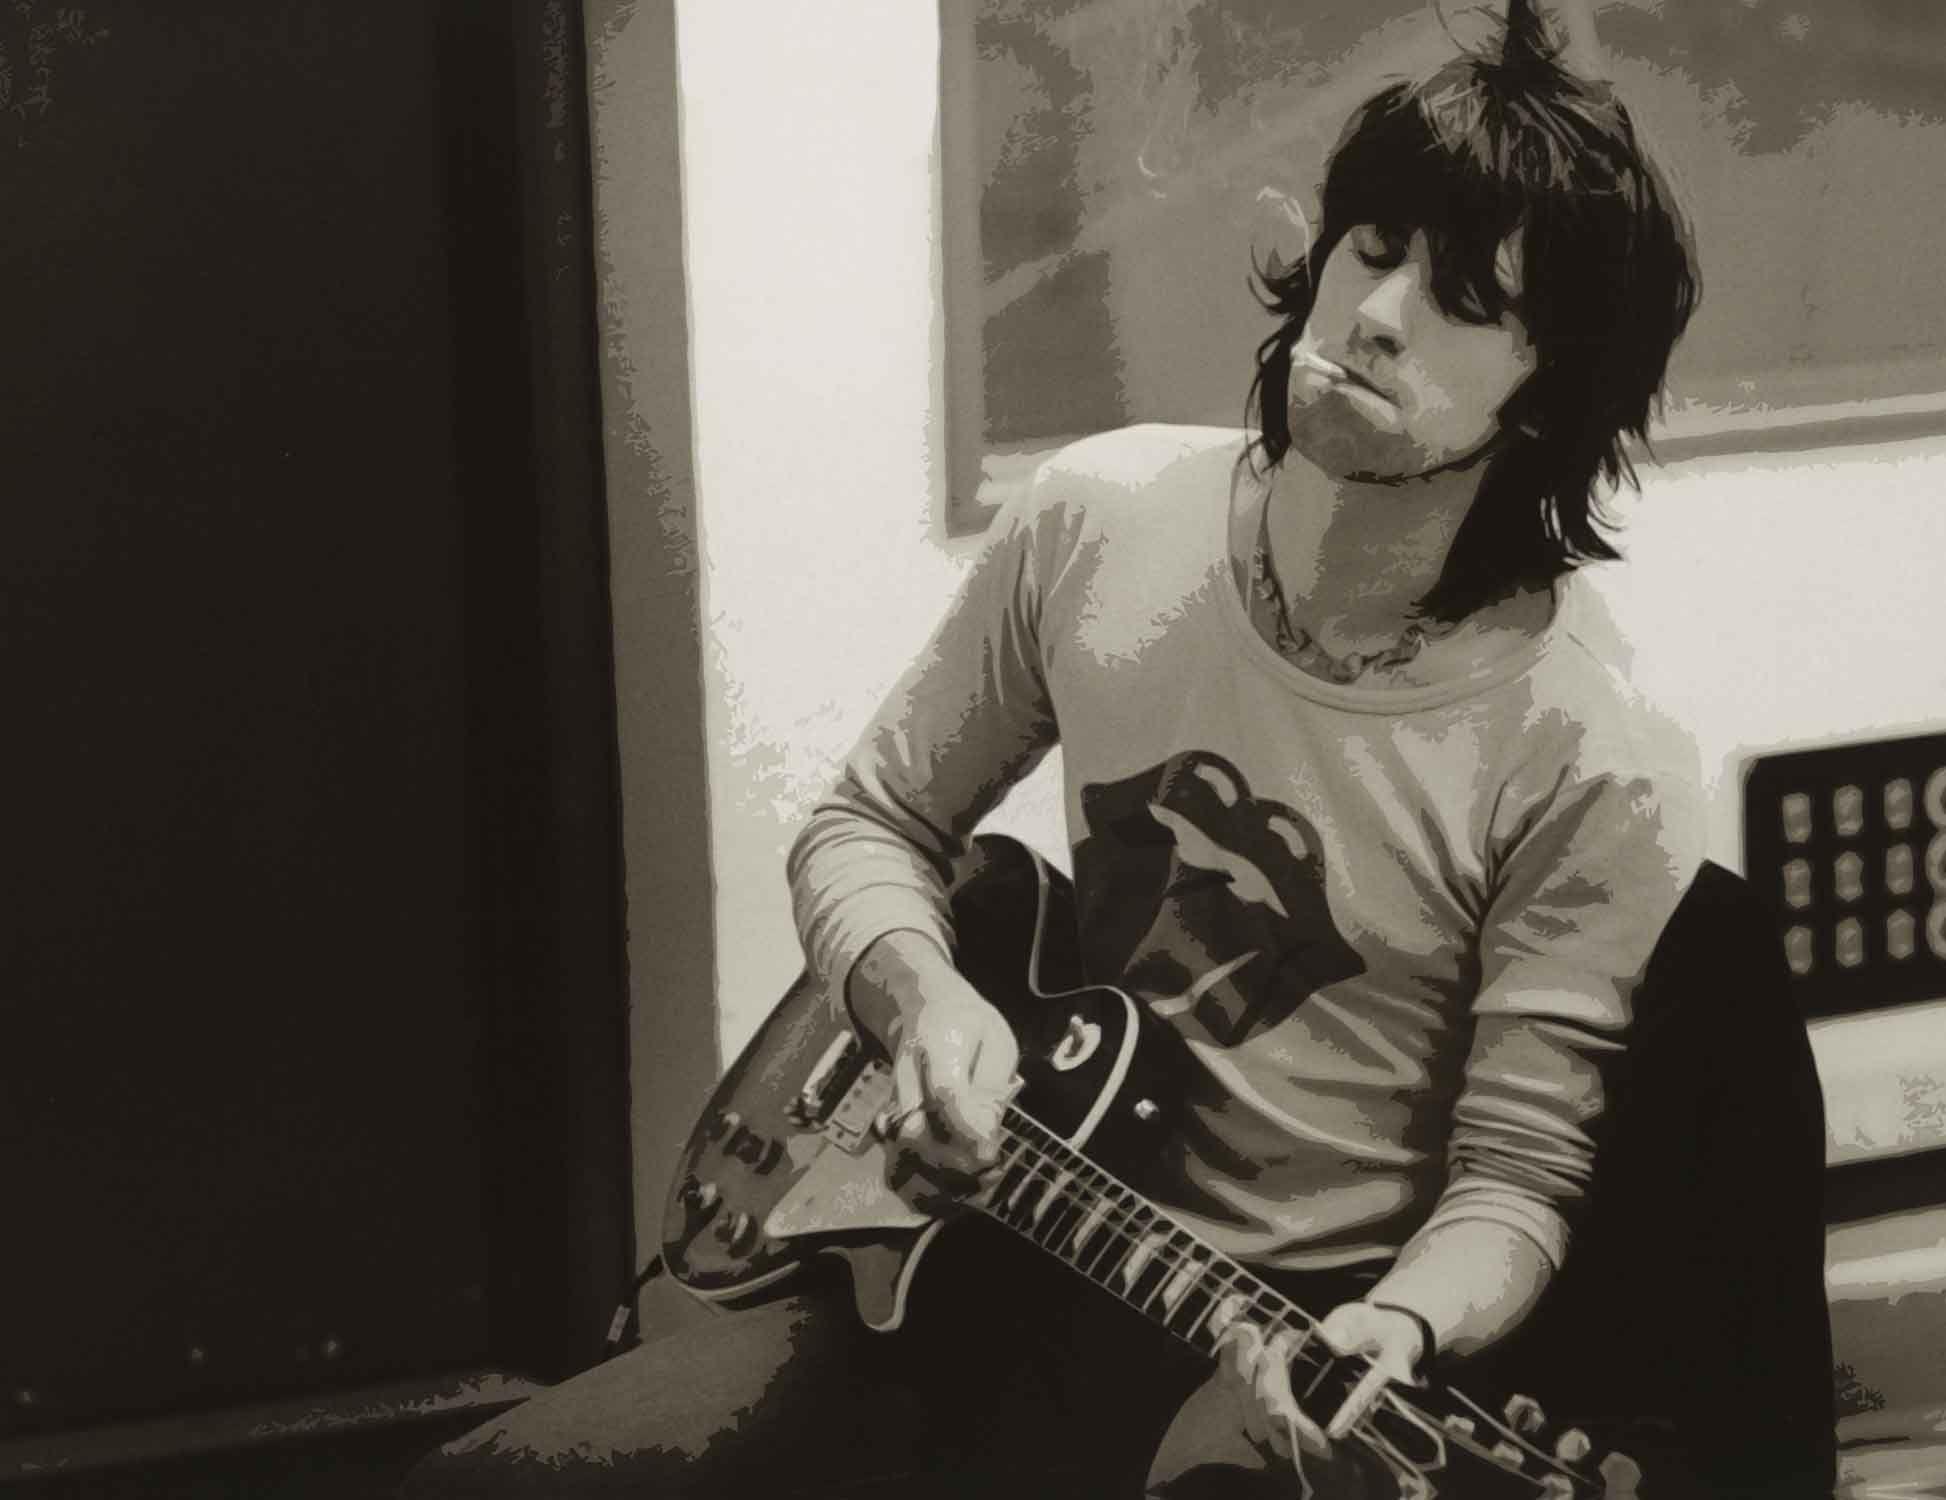 Mick Jagger, Rolling Stones, guitars, Keith Richards, musicians